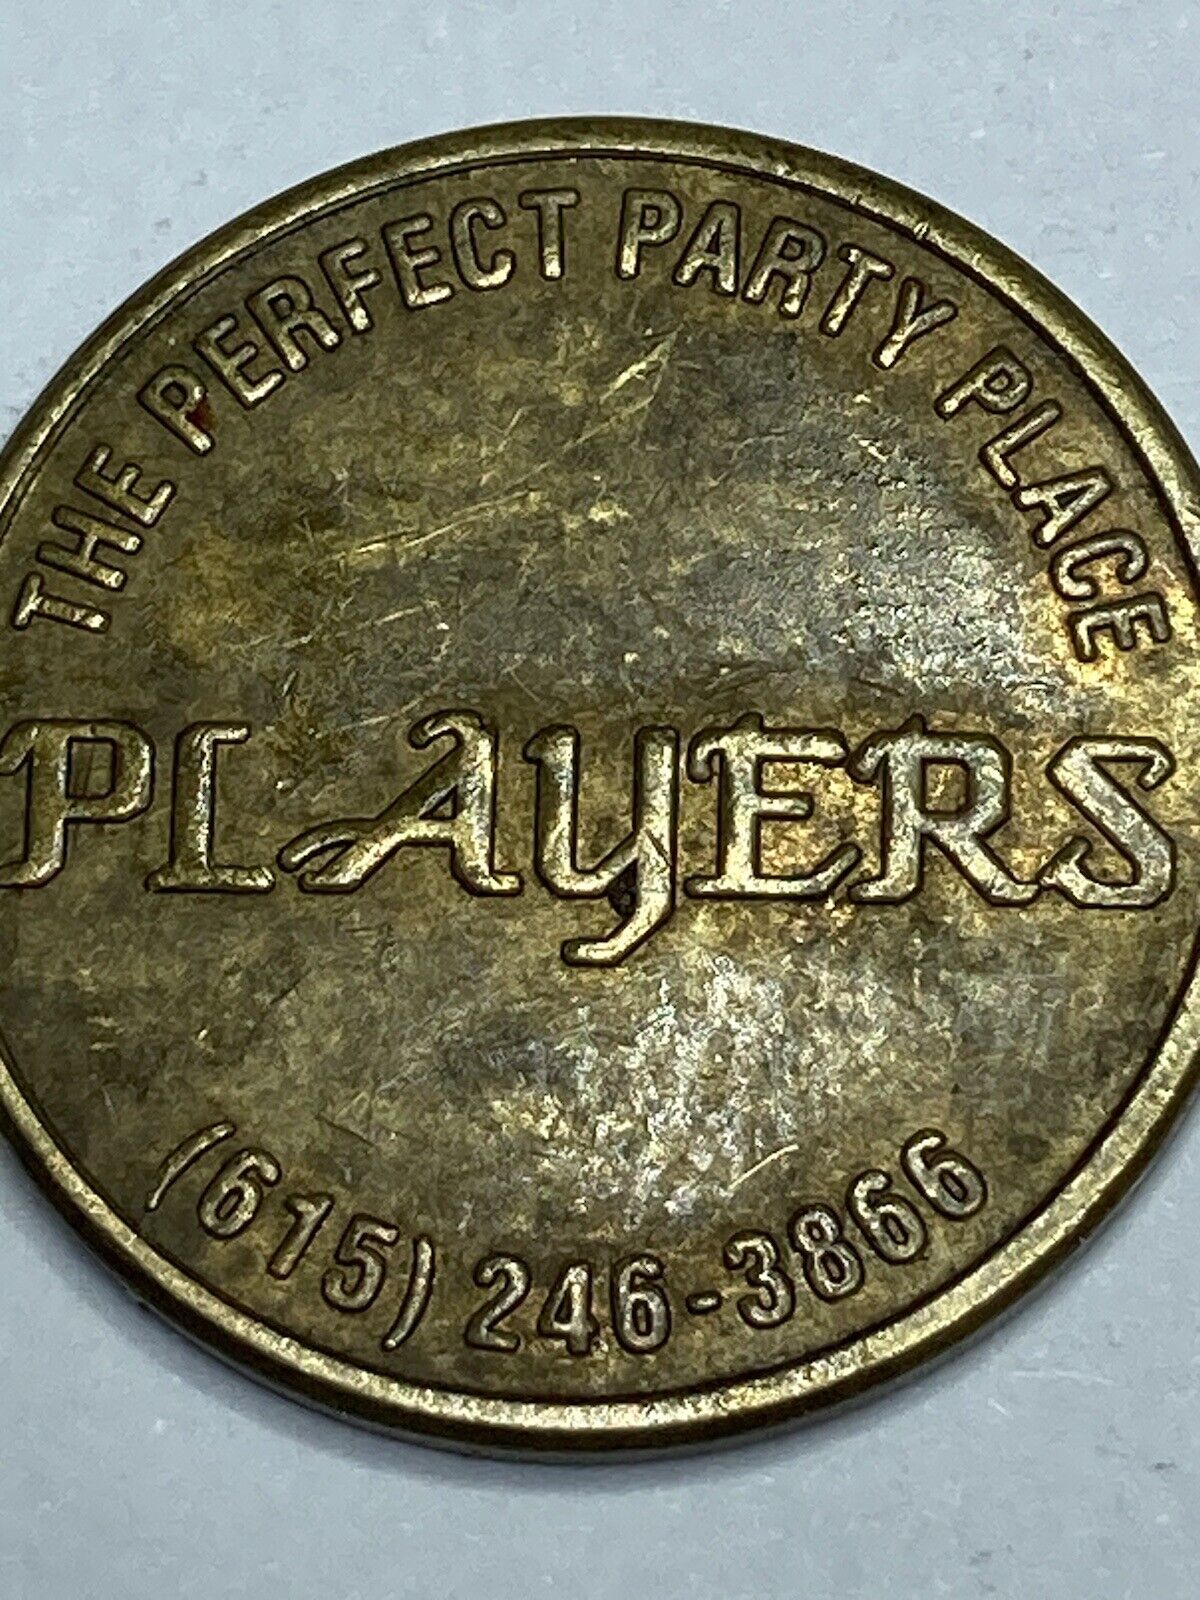 VINTAGE PLAYERS - THE PERFECT PARTY PLACE - VIDEO GAME ARCADE TOKEN - LOOK